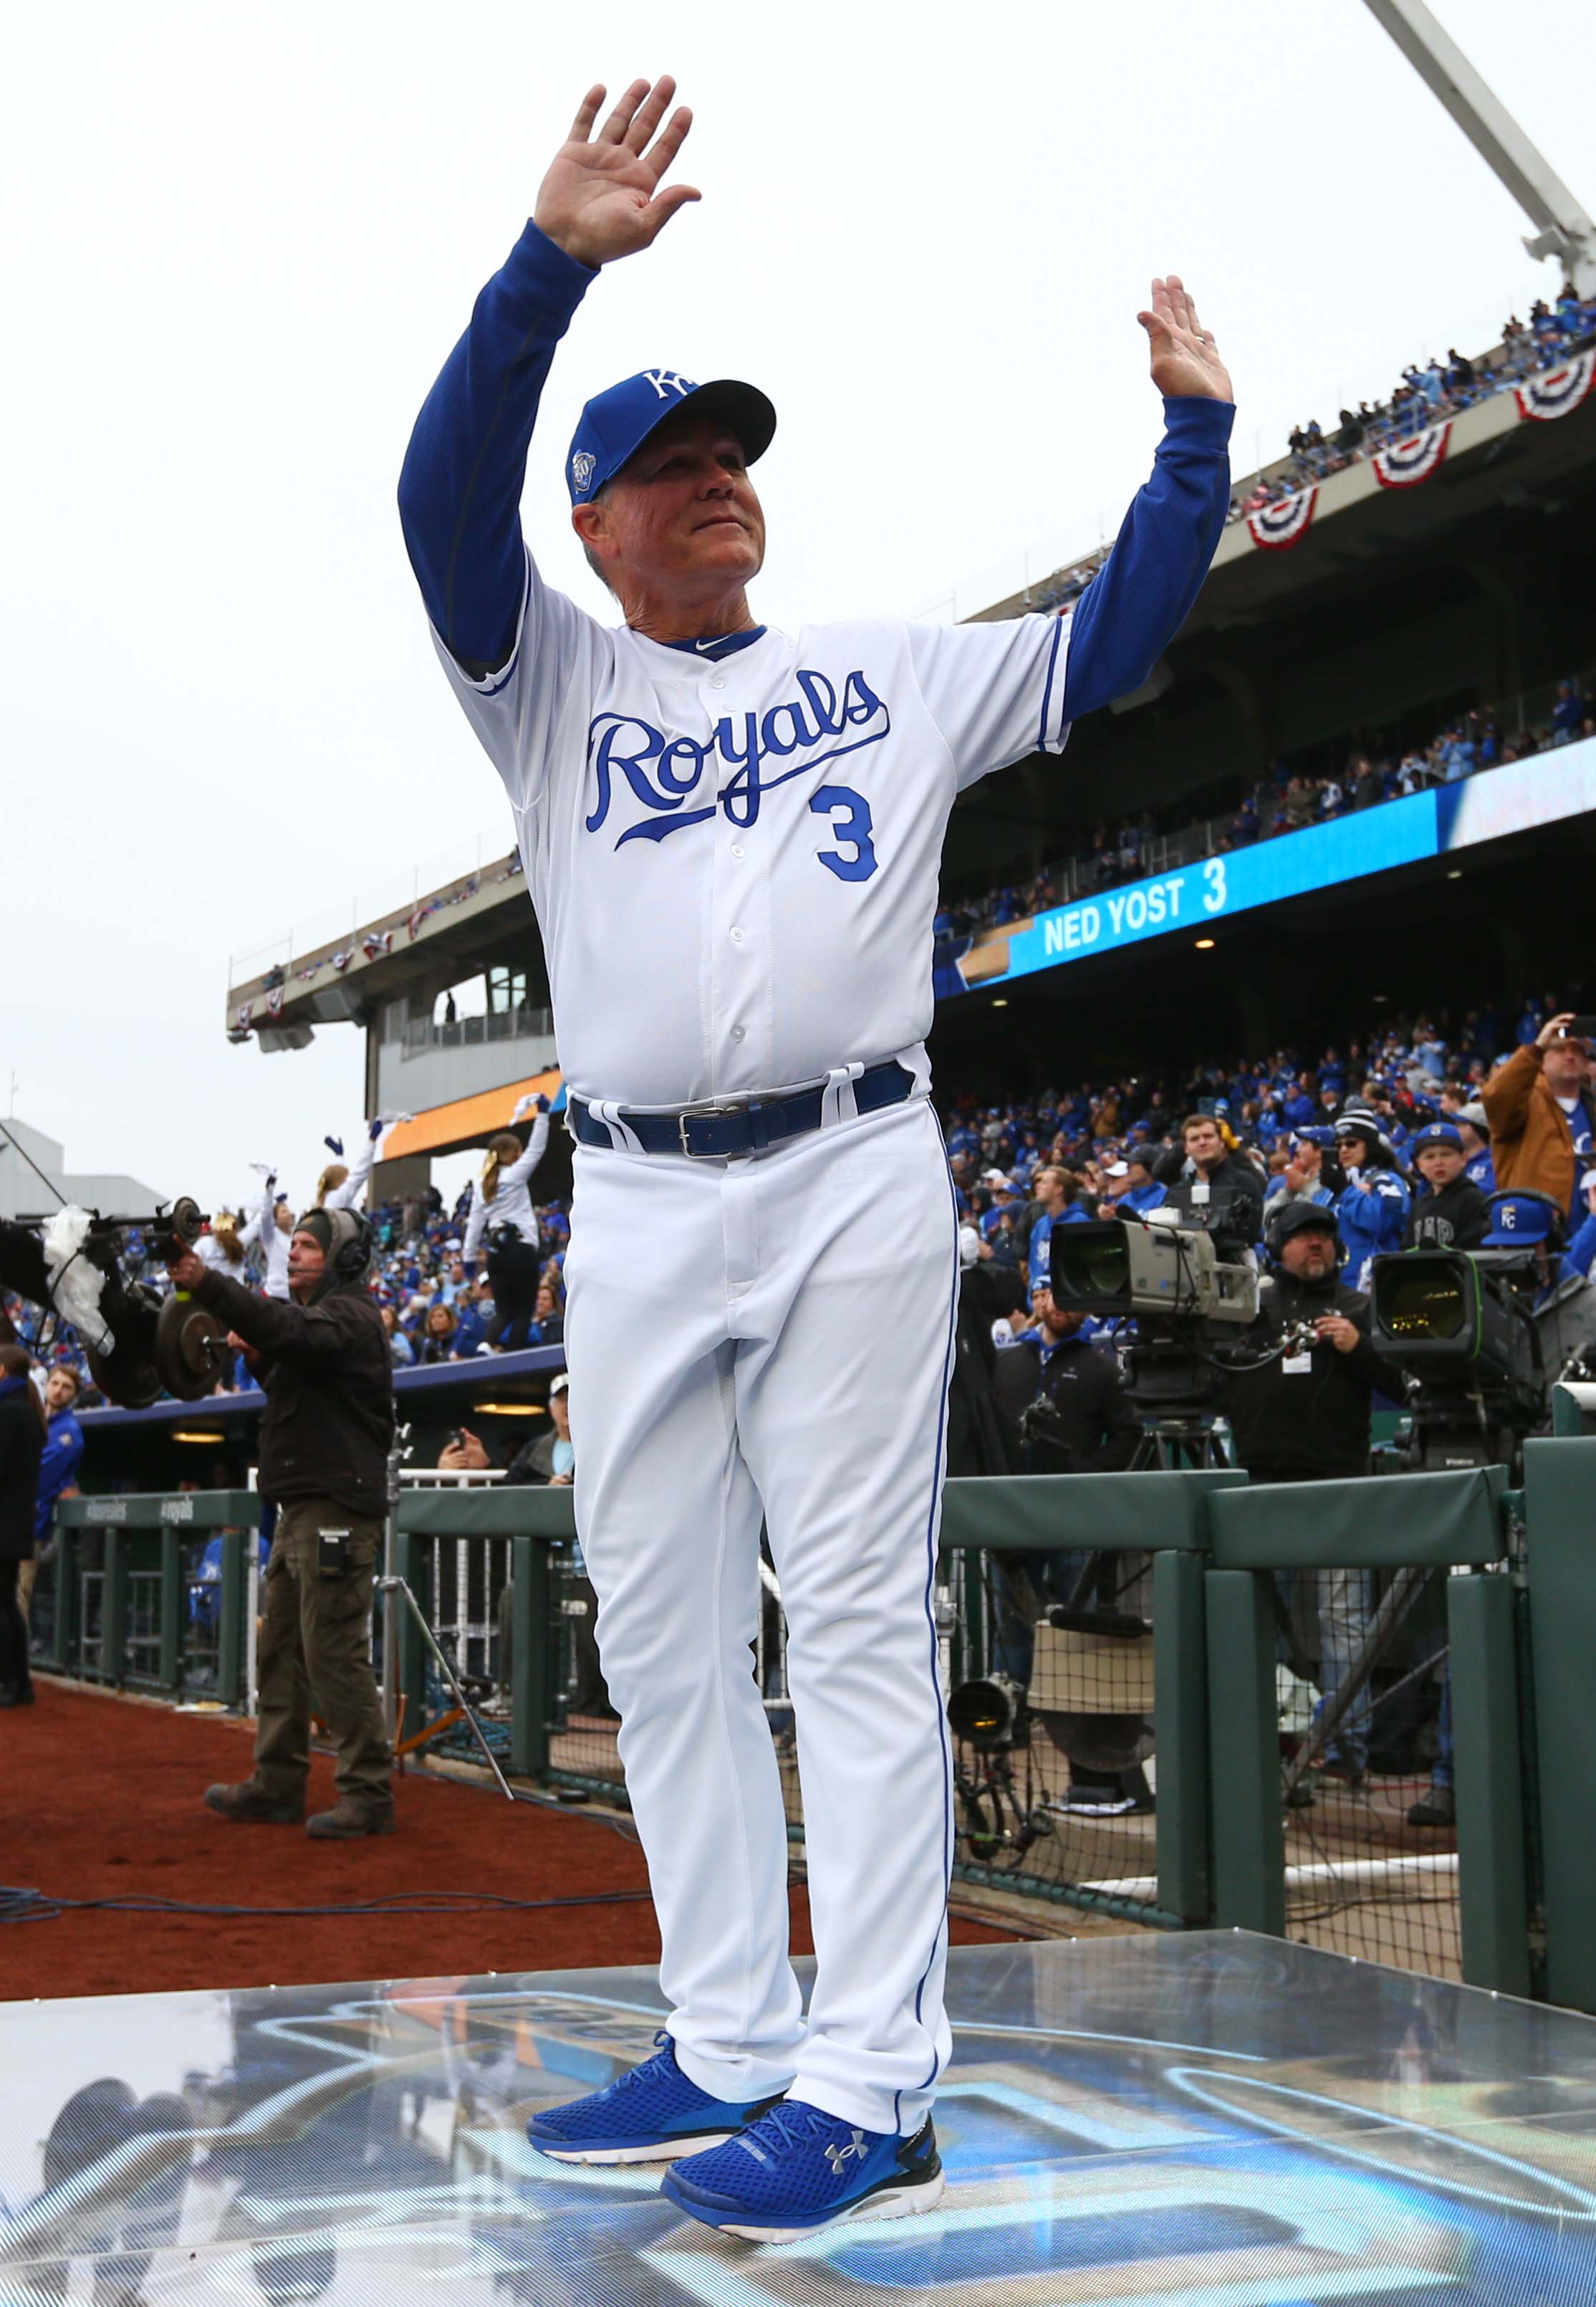 Former Brewers and current Royals manager Ned Yost to retire after